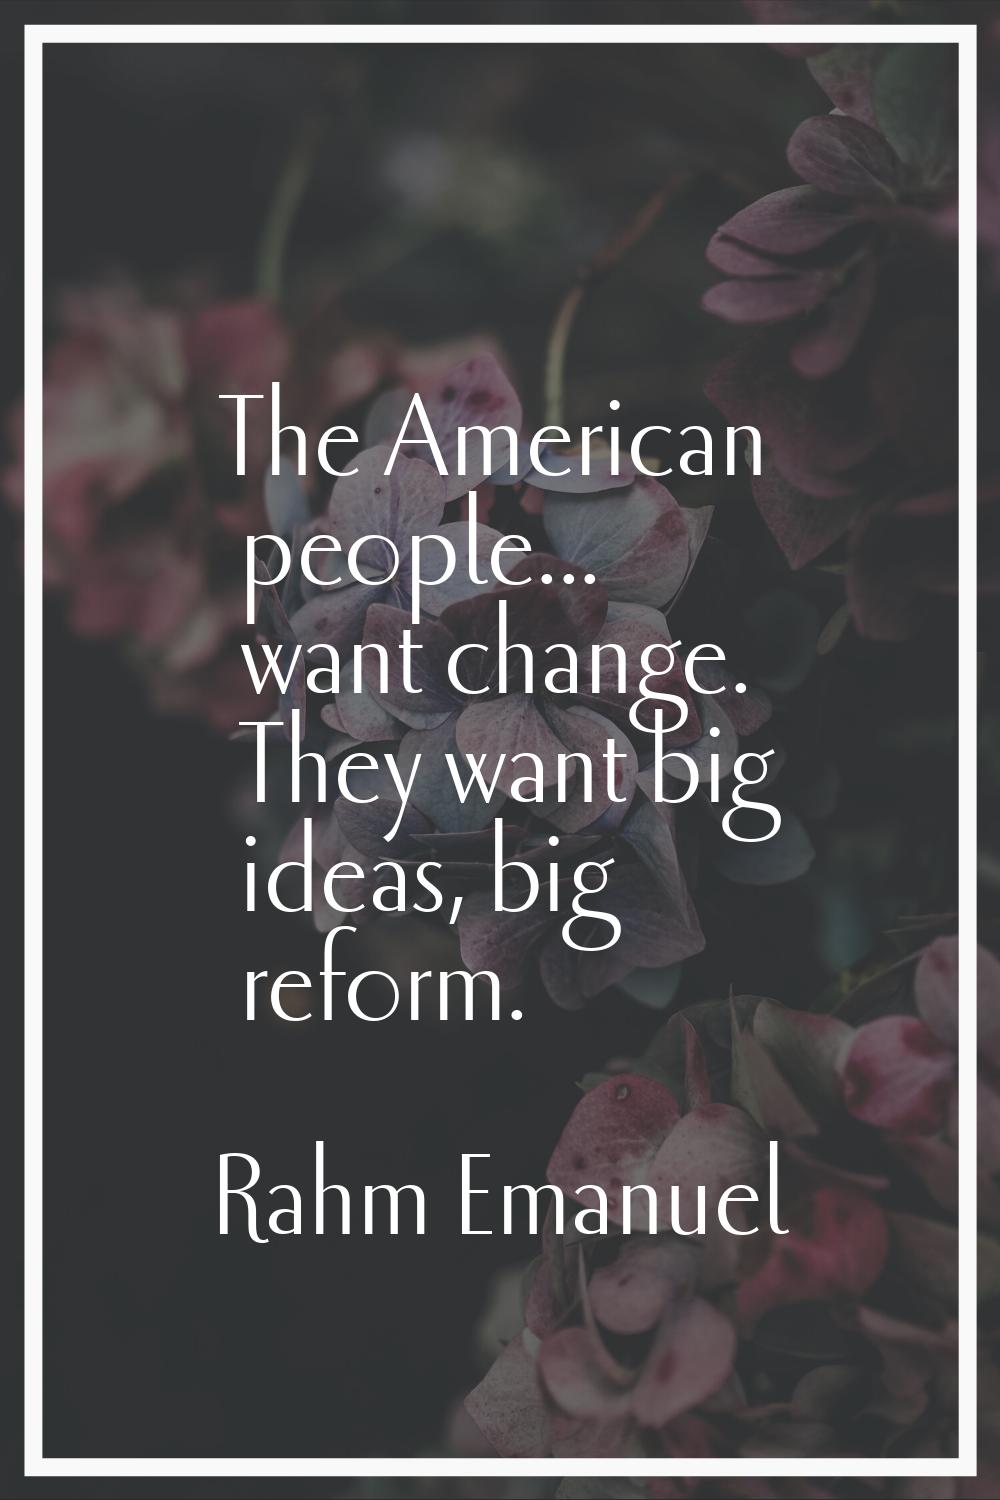 The American people... want change. They want big ideas, big reform.